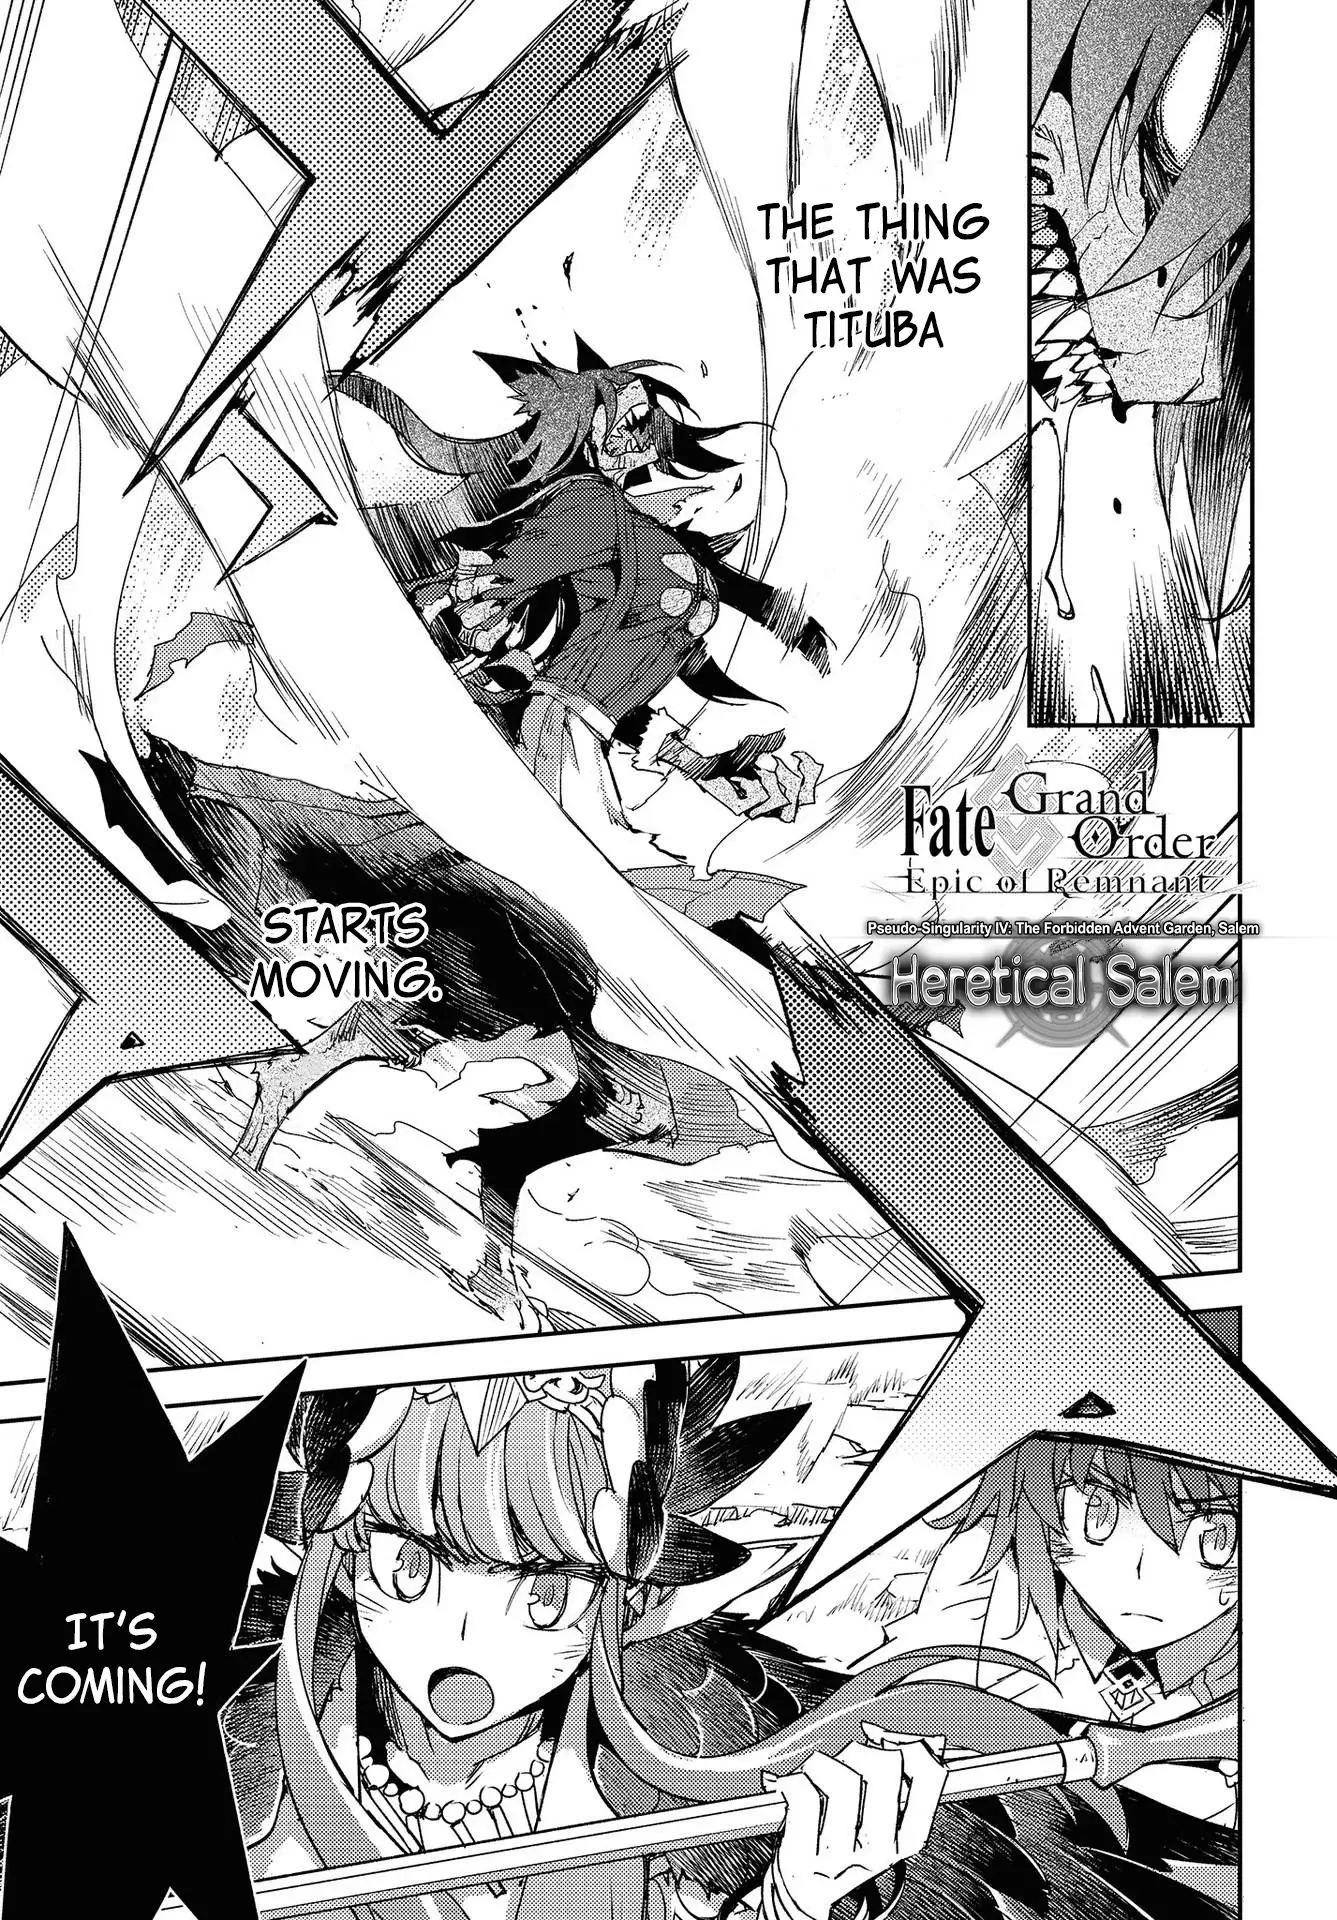 Fate/grand Order: Epic Of Remnant - Subspecies Singularity Iv: Taboo Advent Salem: Salem Of Heresy - 18 page 1